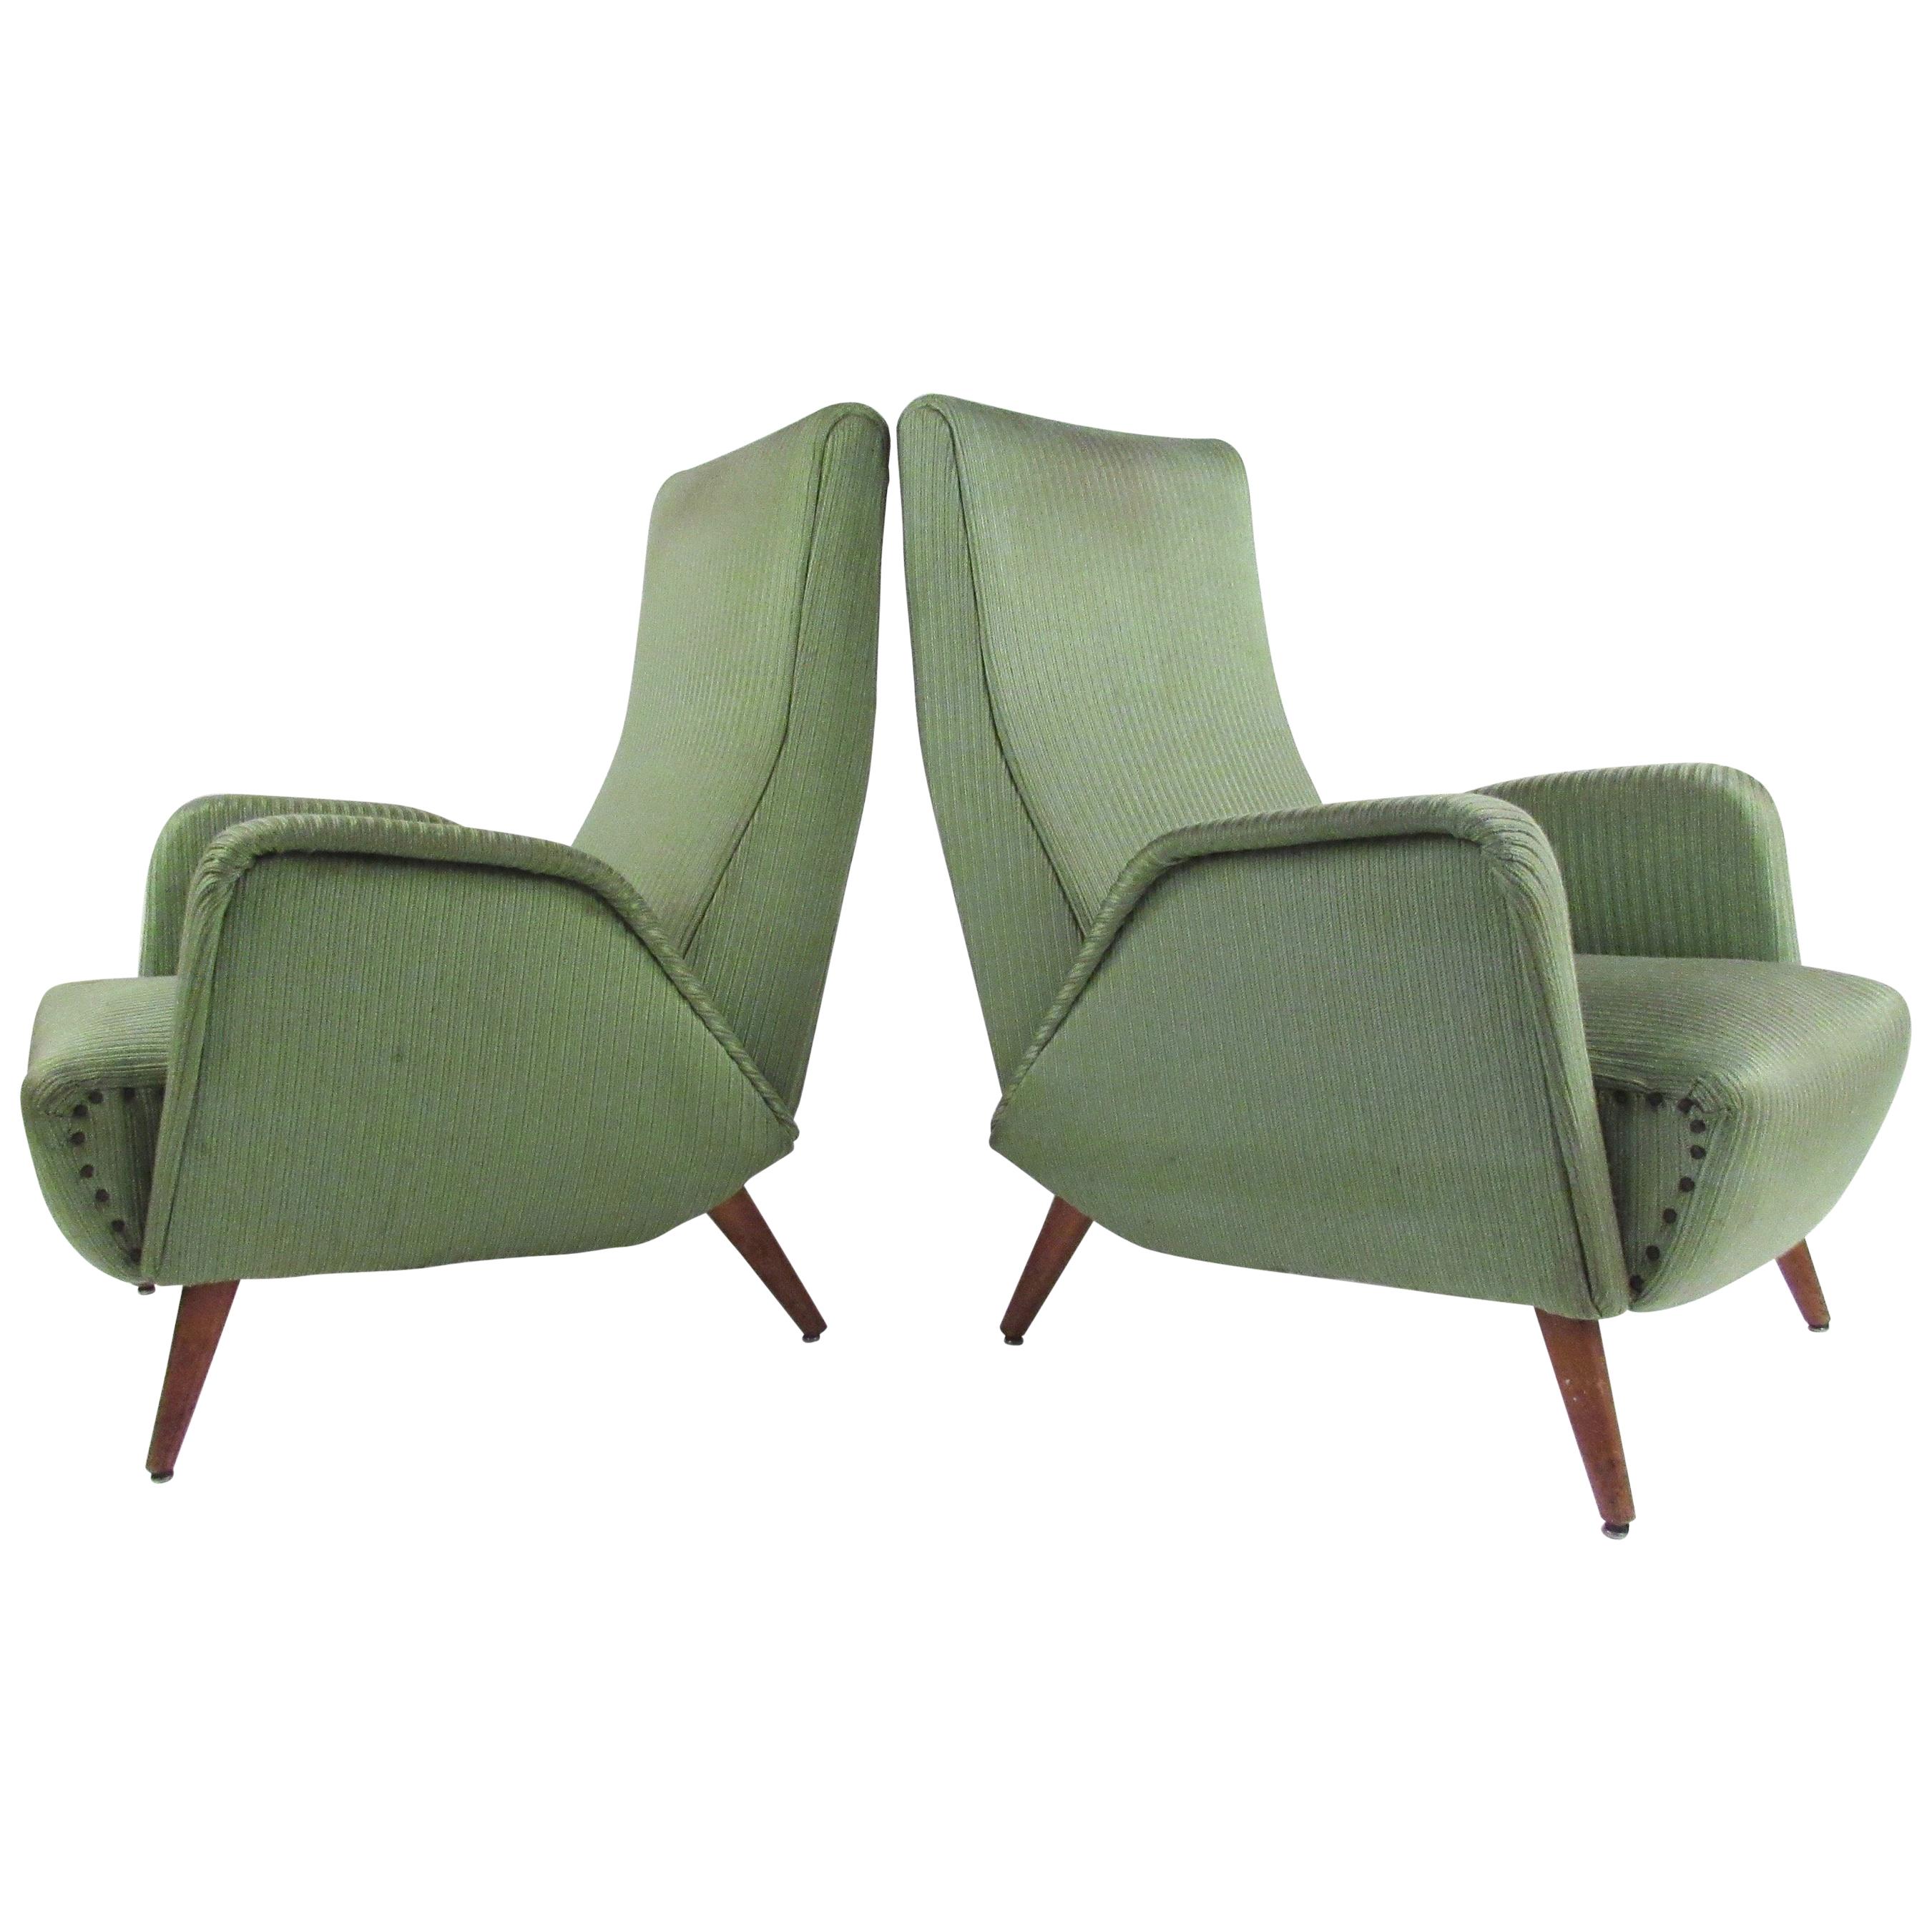 Pair of Italian Moderne Lounge Chairs after Marco Zanuso